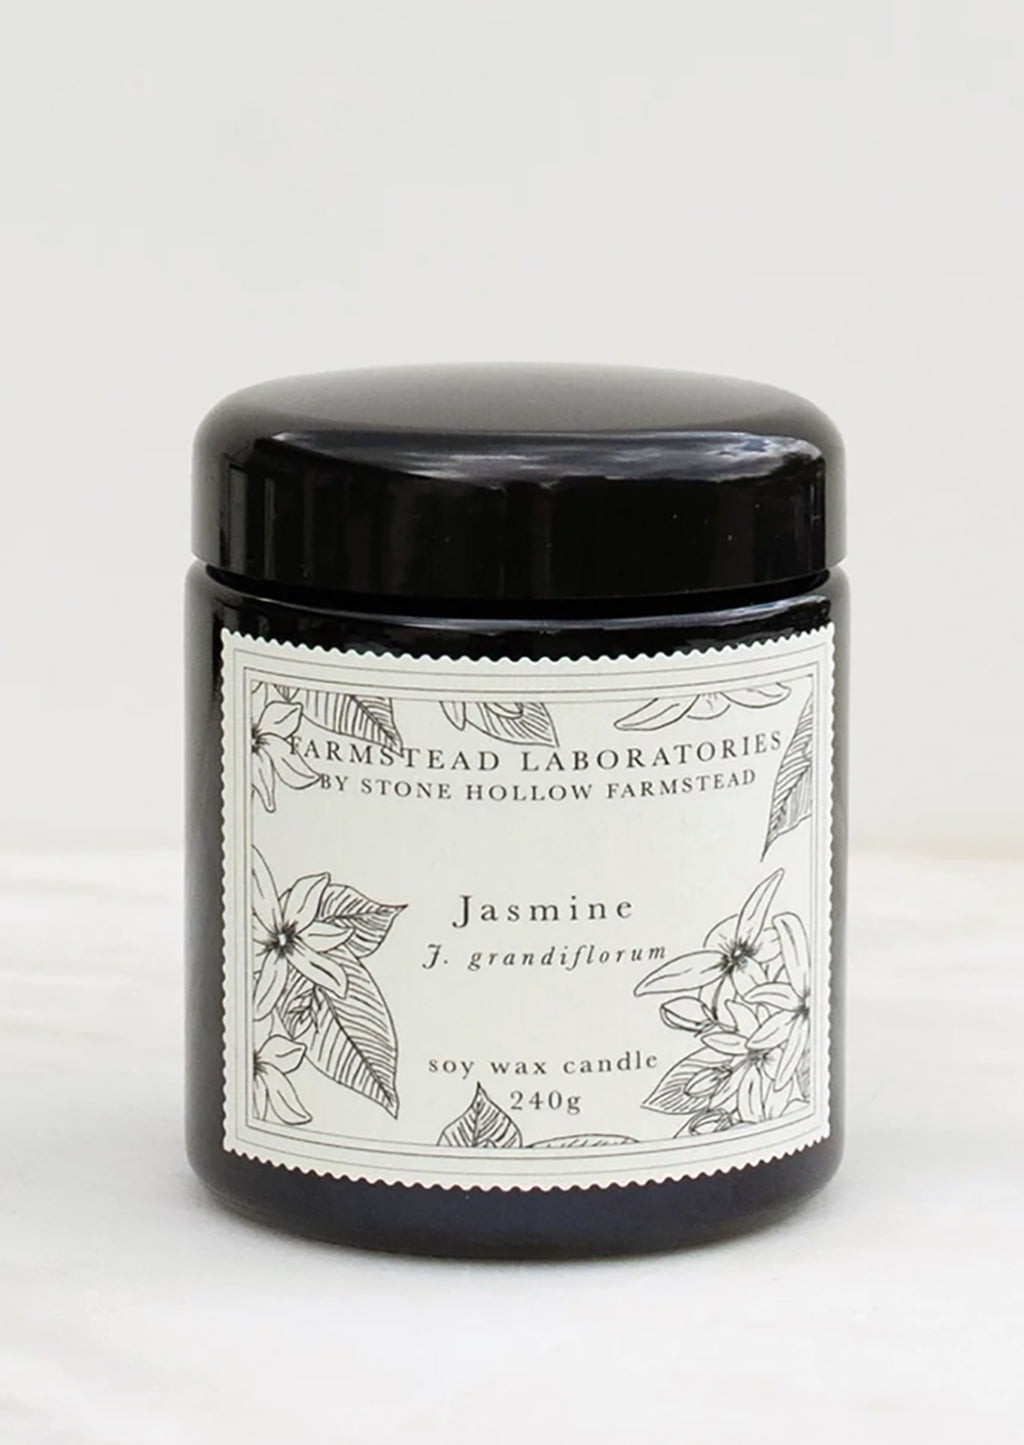 Jasmine: A jasmine scented candle in black jar with black and white botanical label.